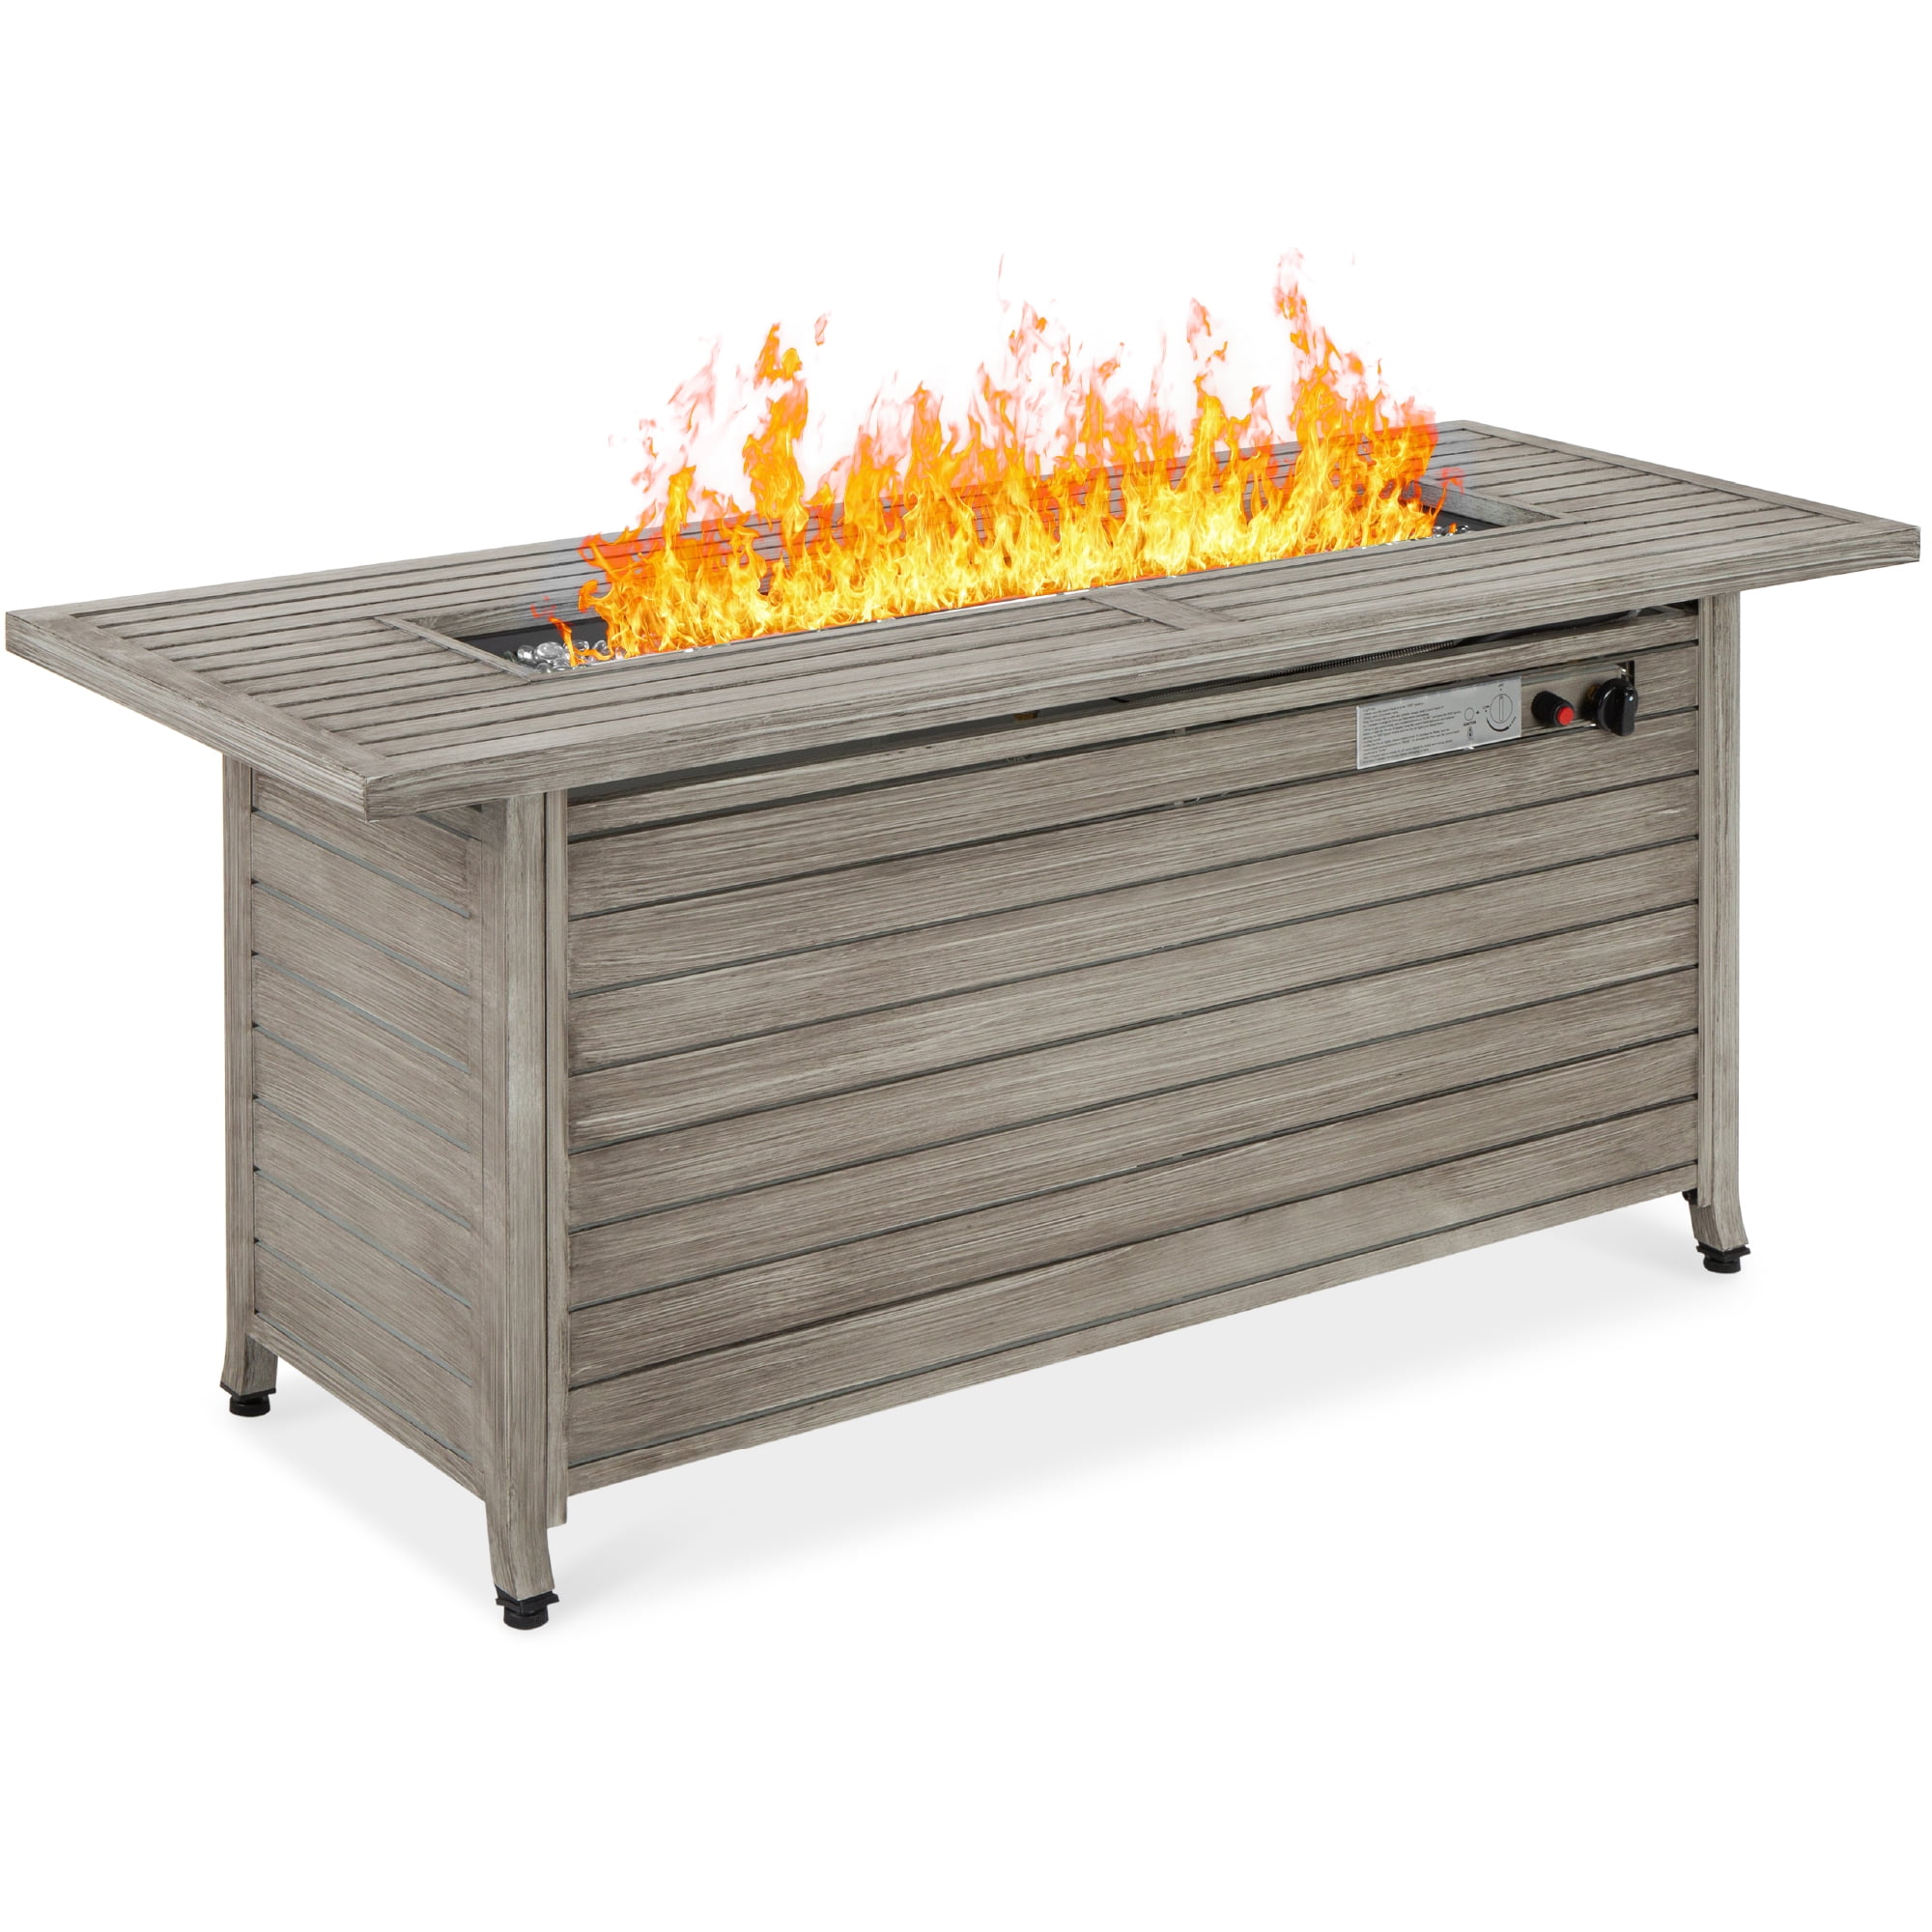 Best Choice Products 57in 50 000 Btu Rectangular Propane Aluminum Gas Fire Pit Table W Cover Glass Beads Gray Walmart Com